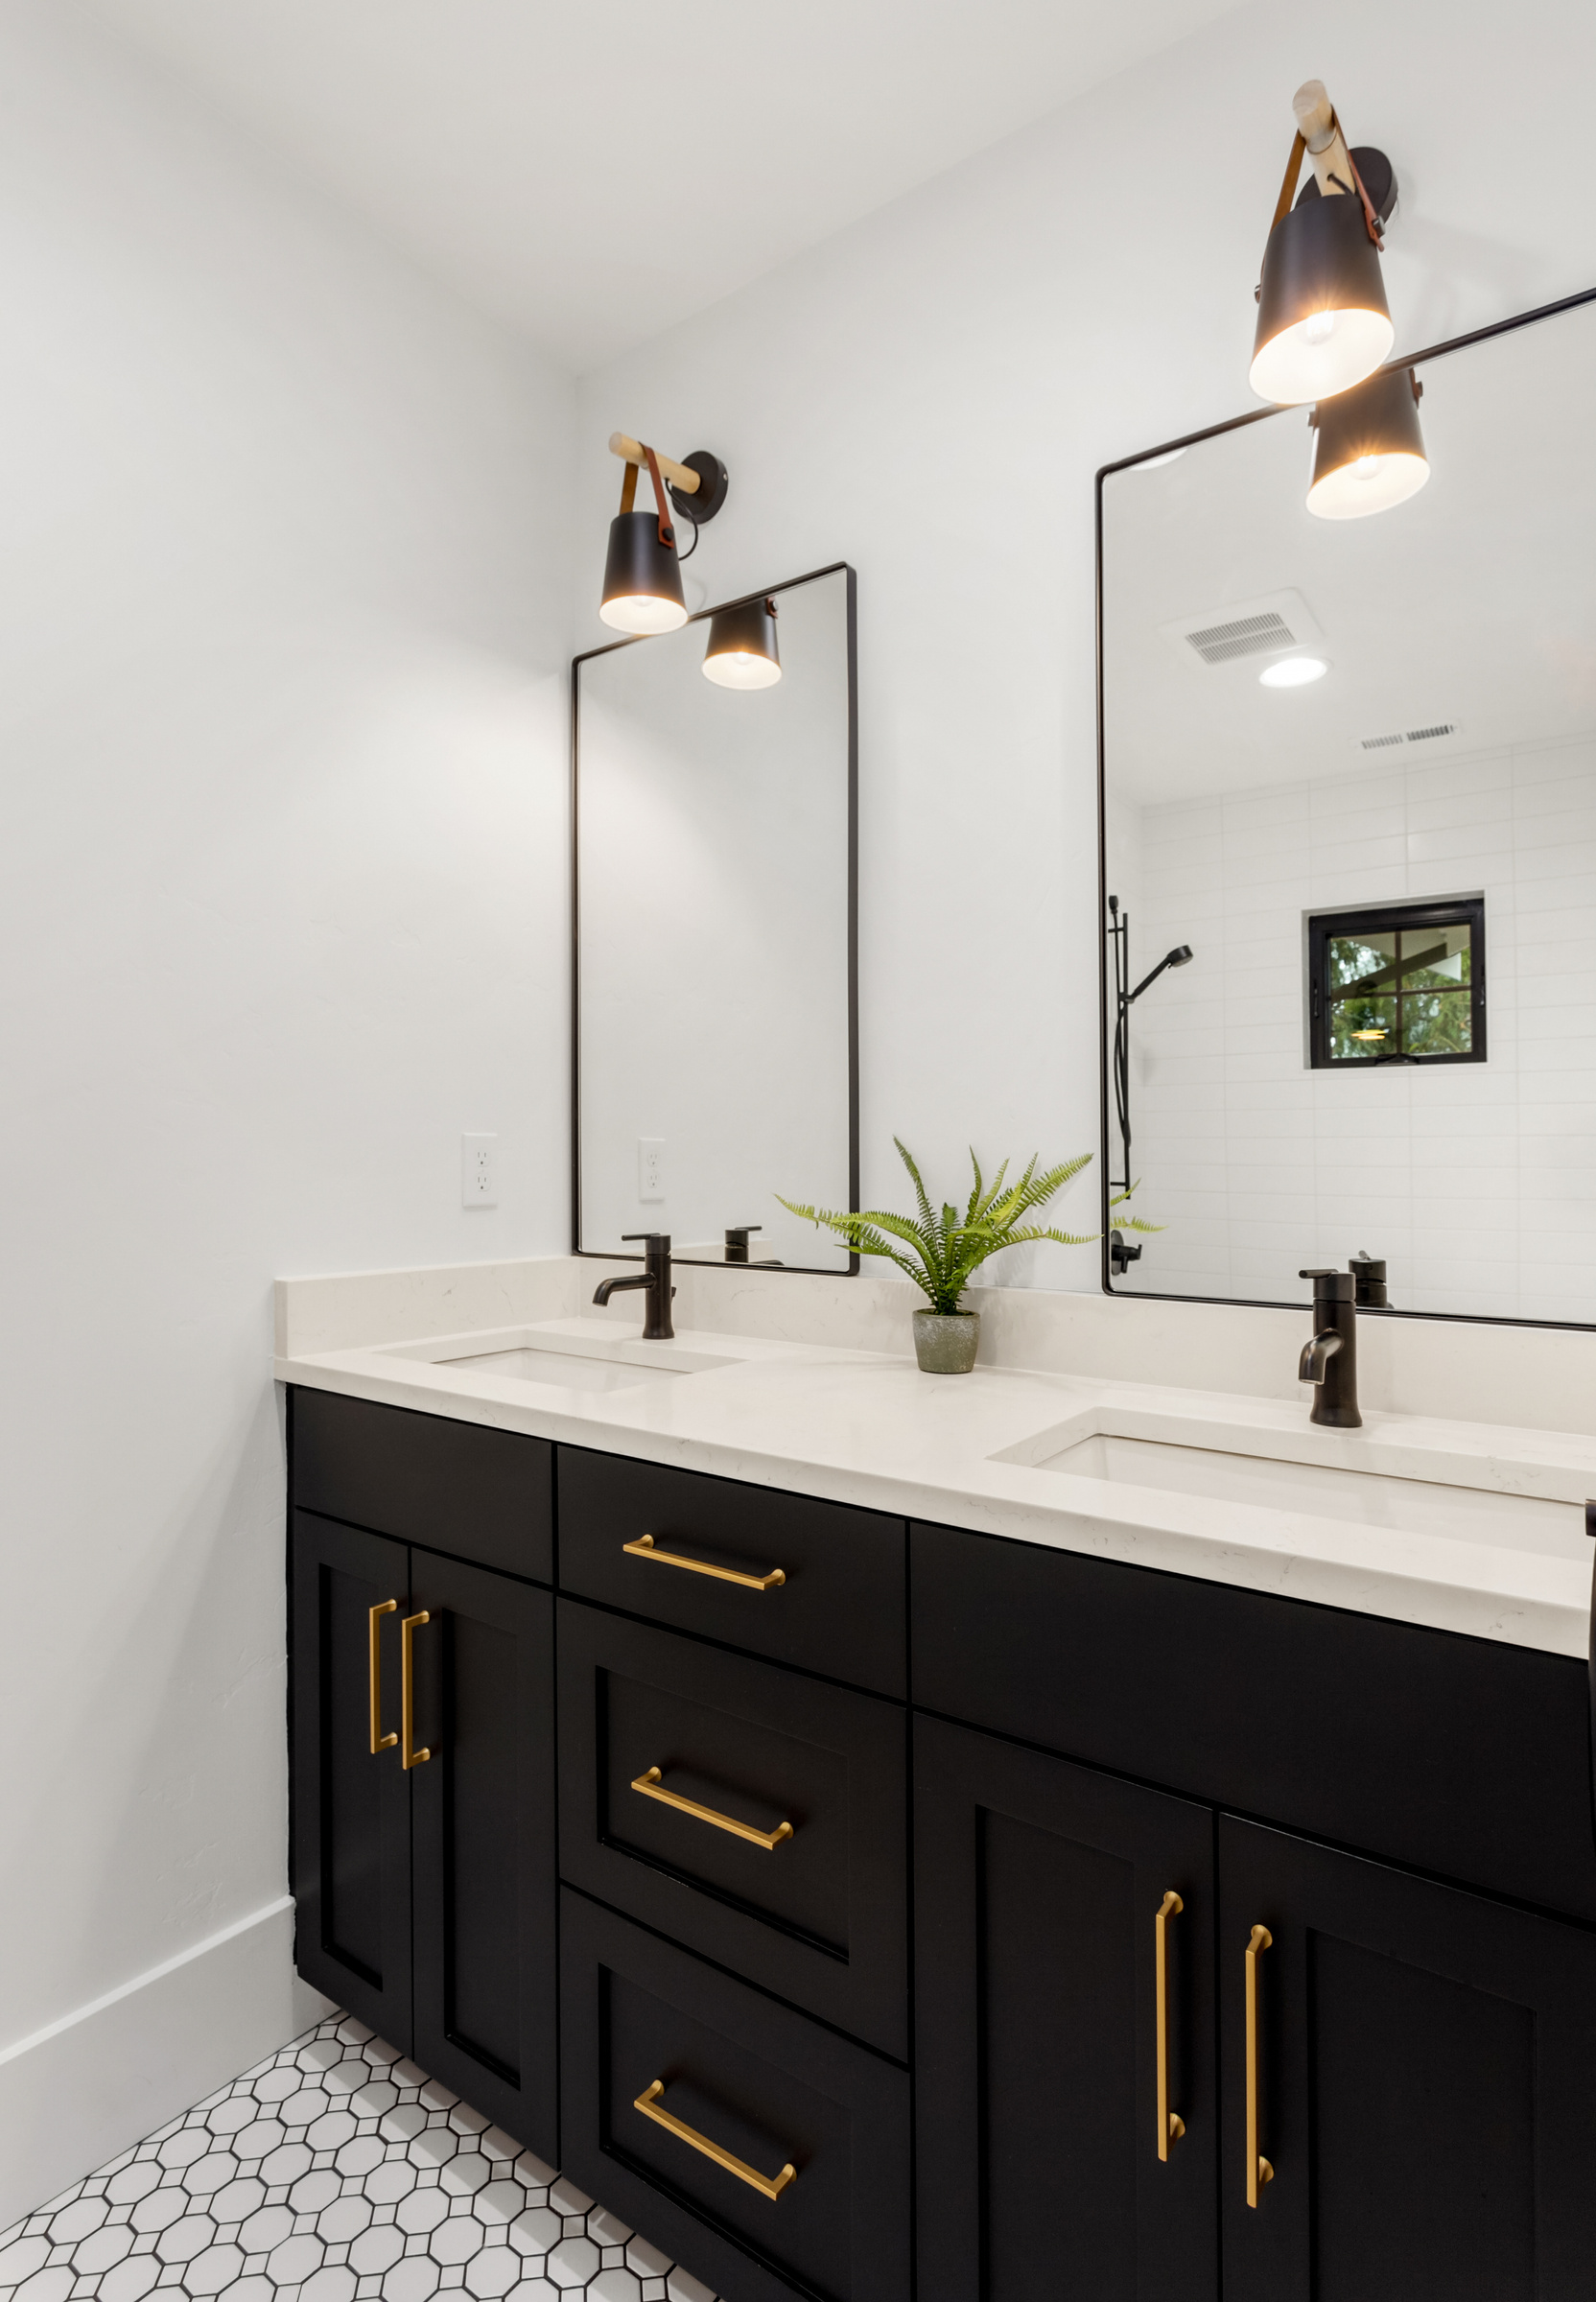 Beautiful bathroom interior in new luxury home with vanity, mirror, and cabinets